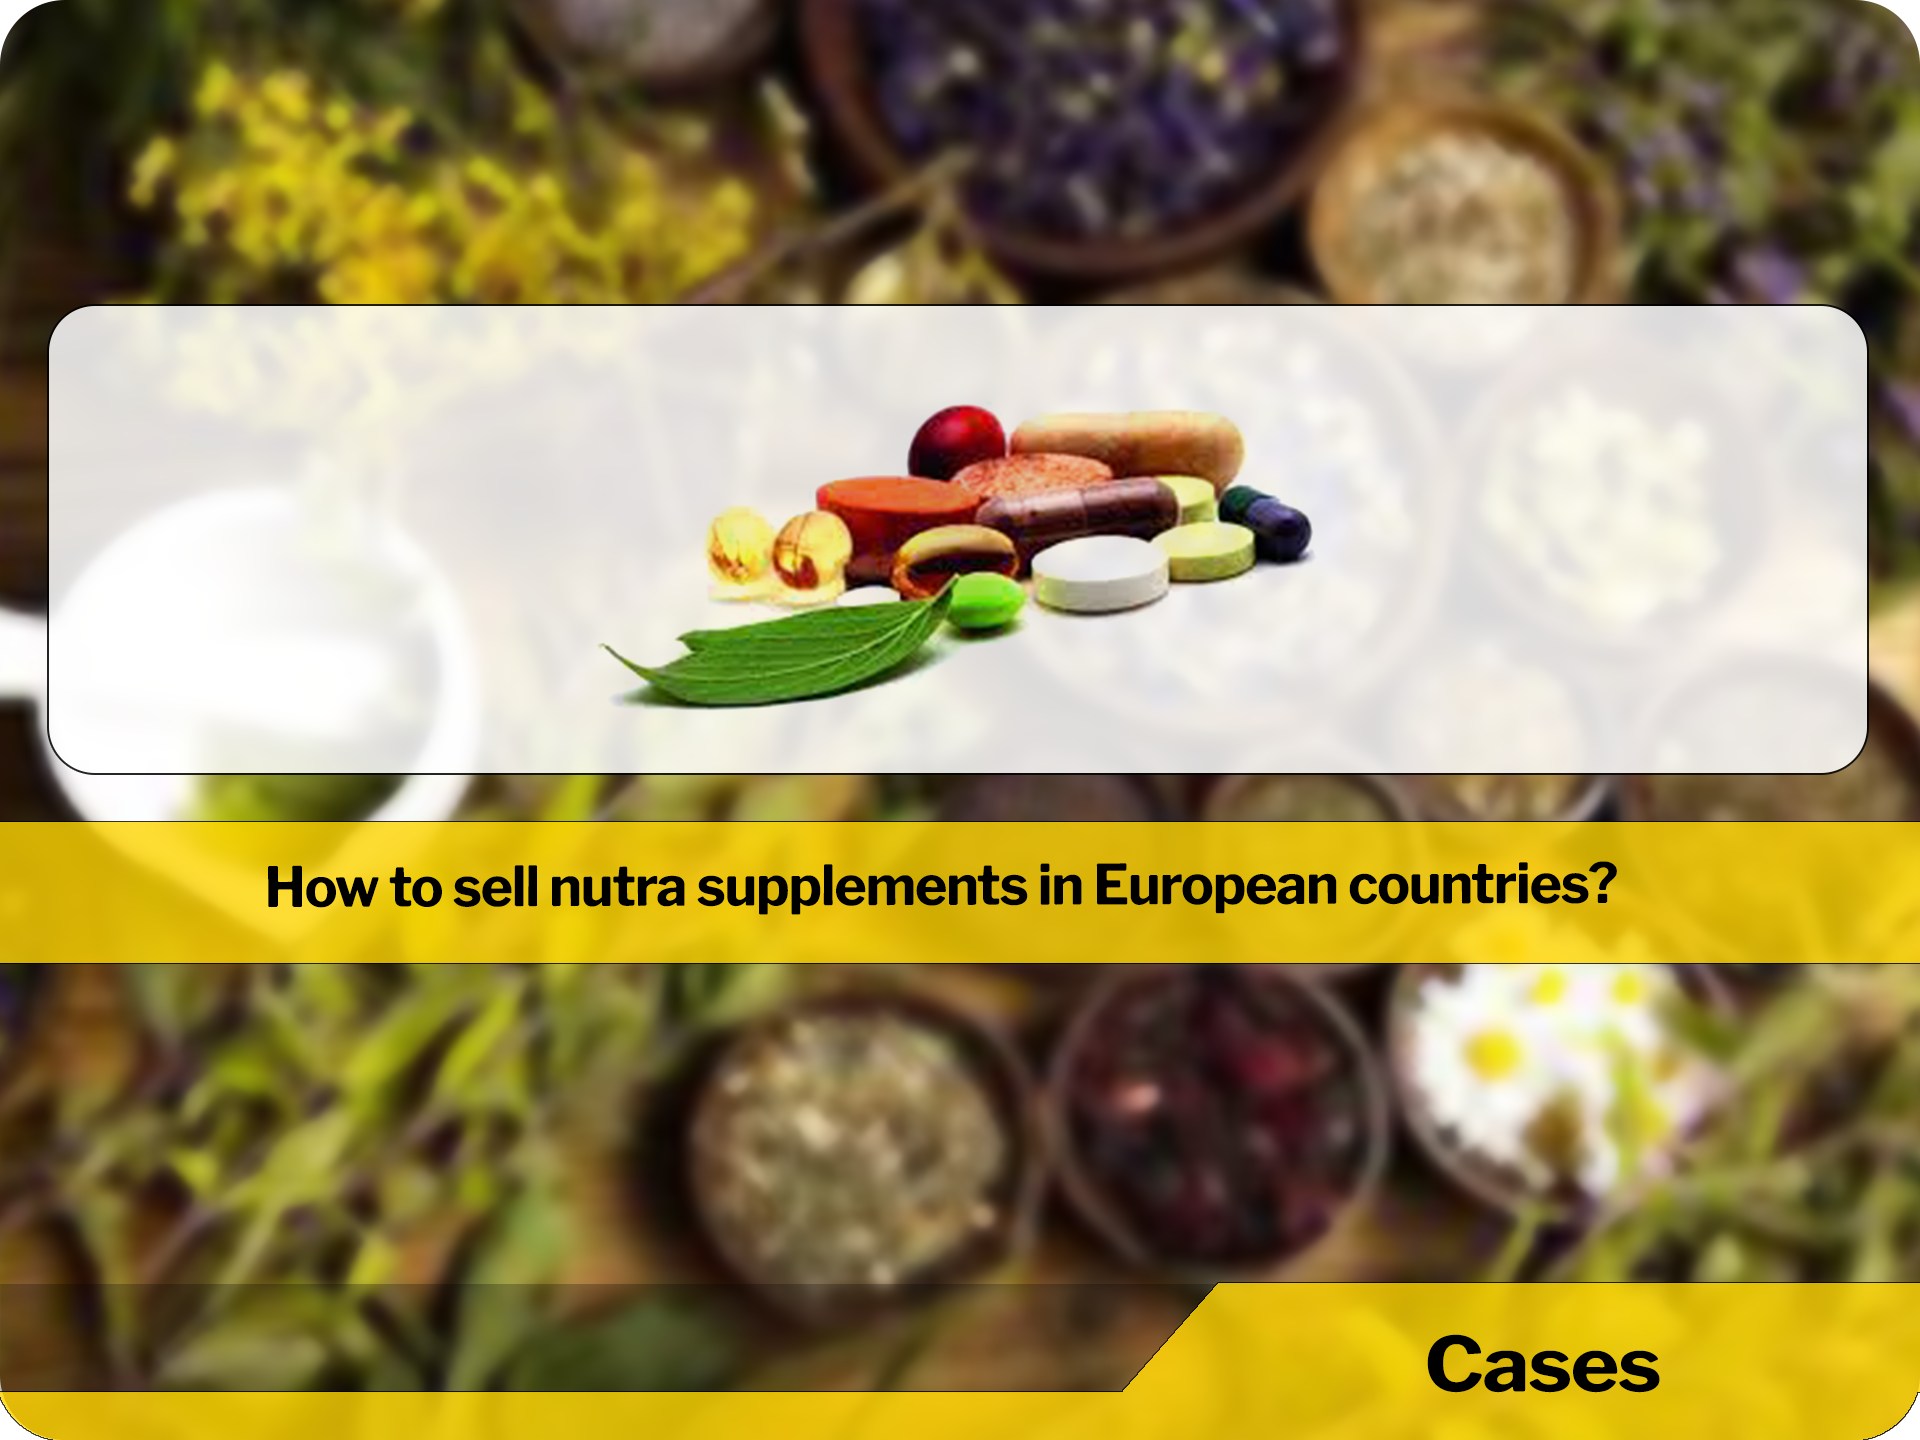 How to sell nutra supplements in European countries?